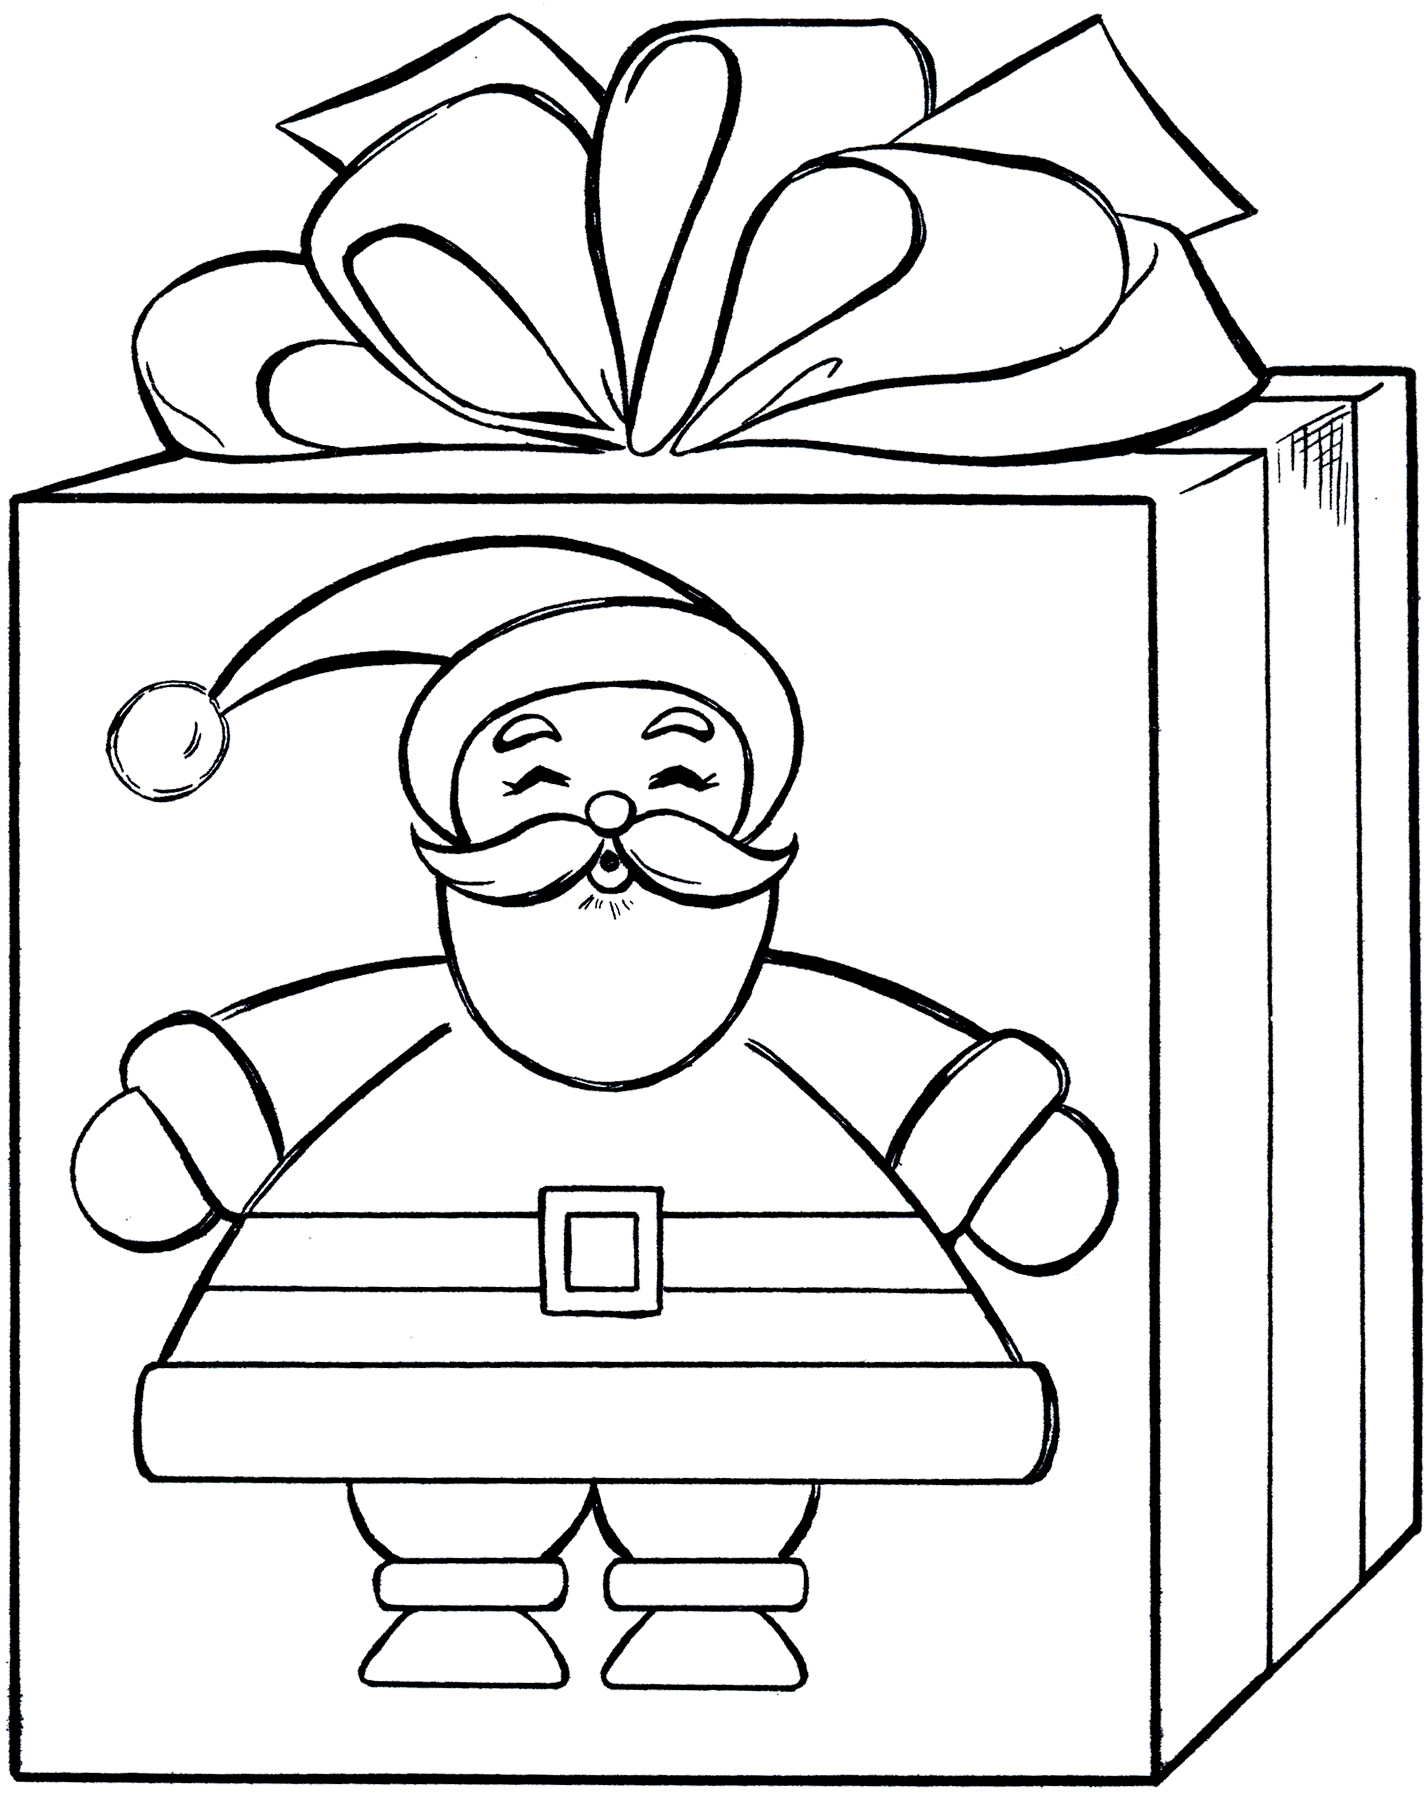 12+ Free Printable Christmas Coloring Pages! - The Graphics Fairy